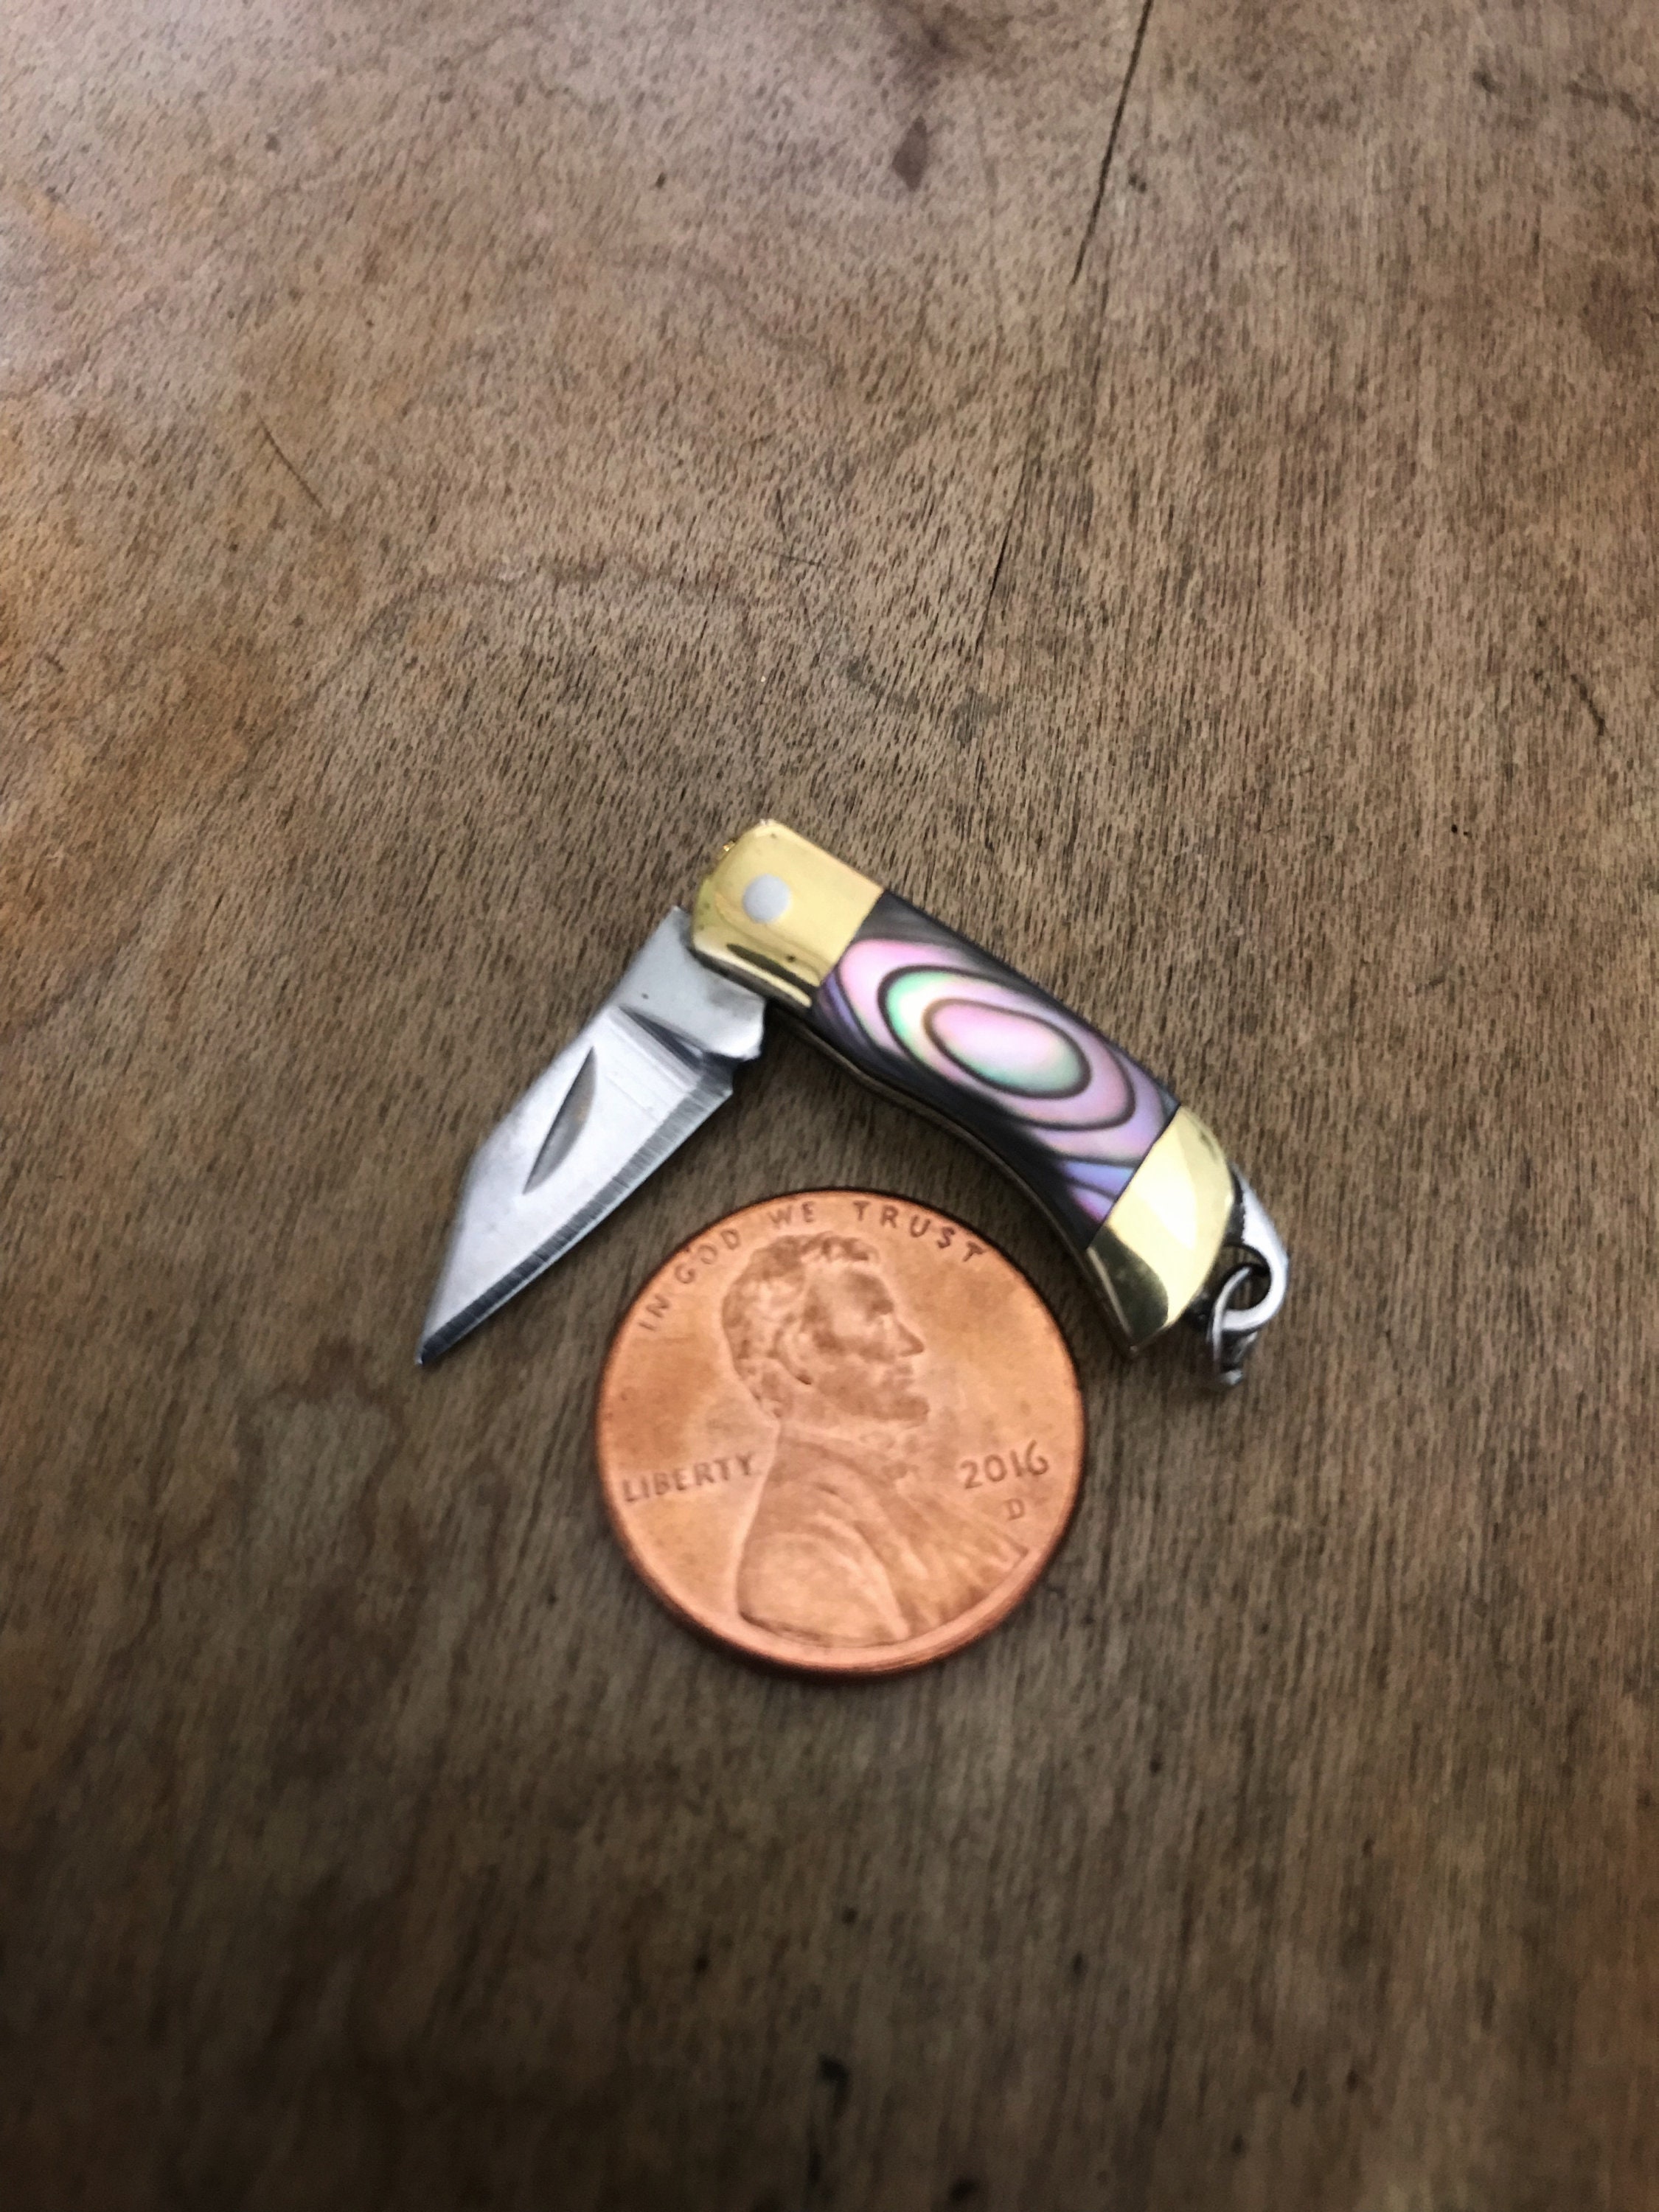  Coowolf Pocket Knife Womens with Chain, Small Pocket Knife,  Stainless Steel and Aluminum Alloy Handle, EDC Small Knife, Practical Key  Accessories Creative Gift for Women : Tools & Home Improvement